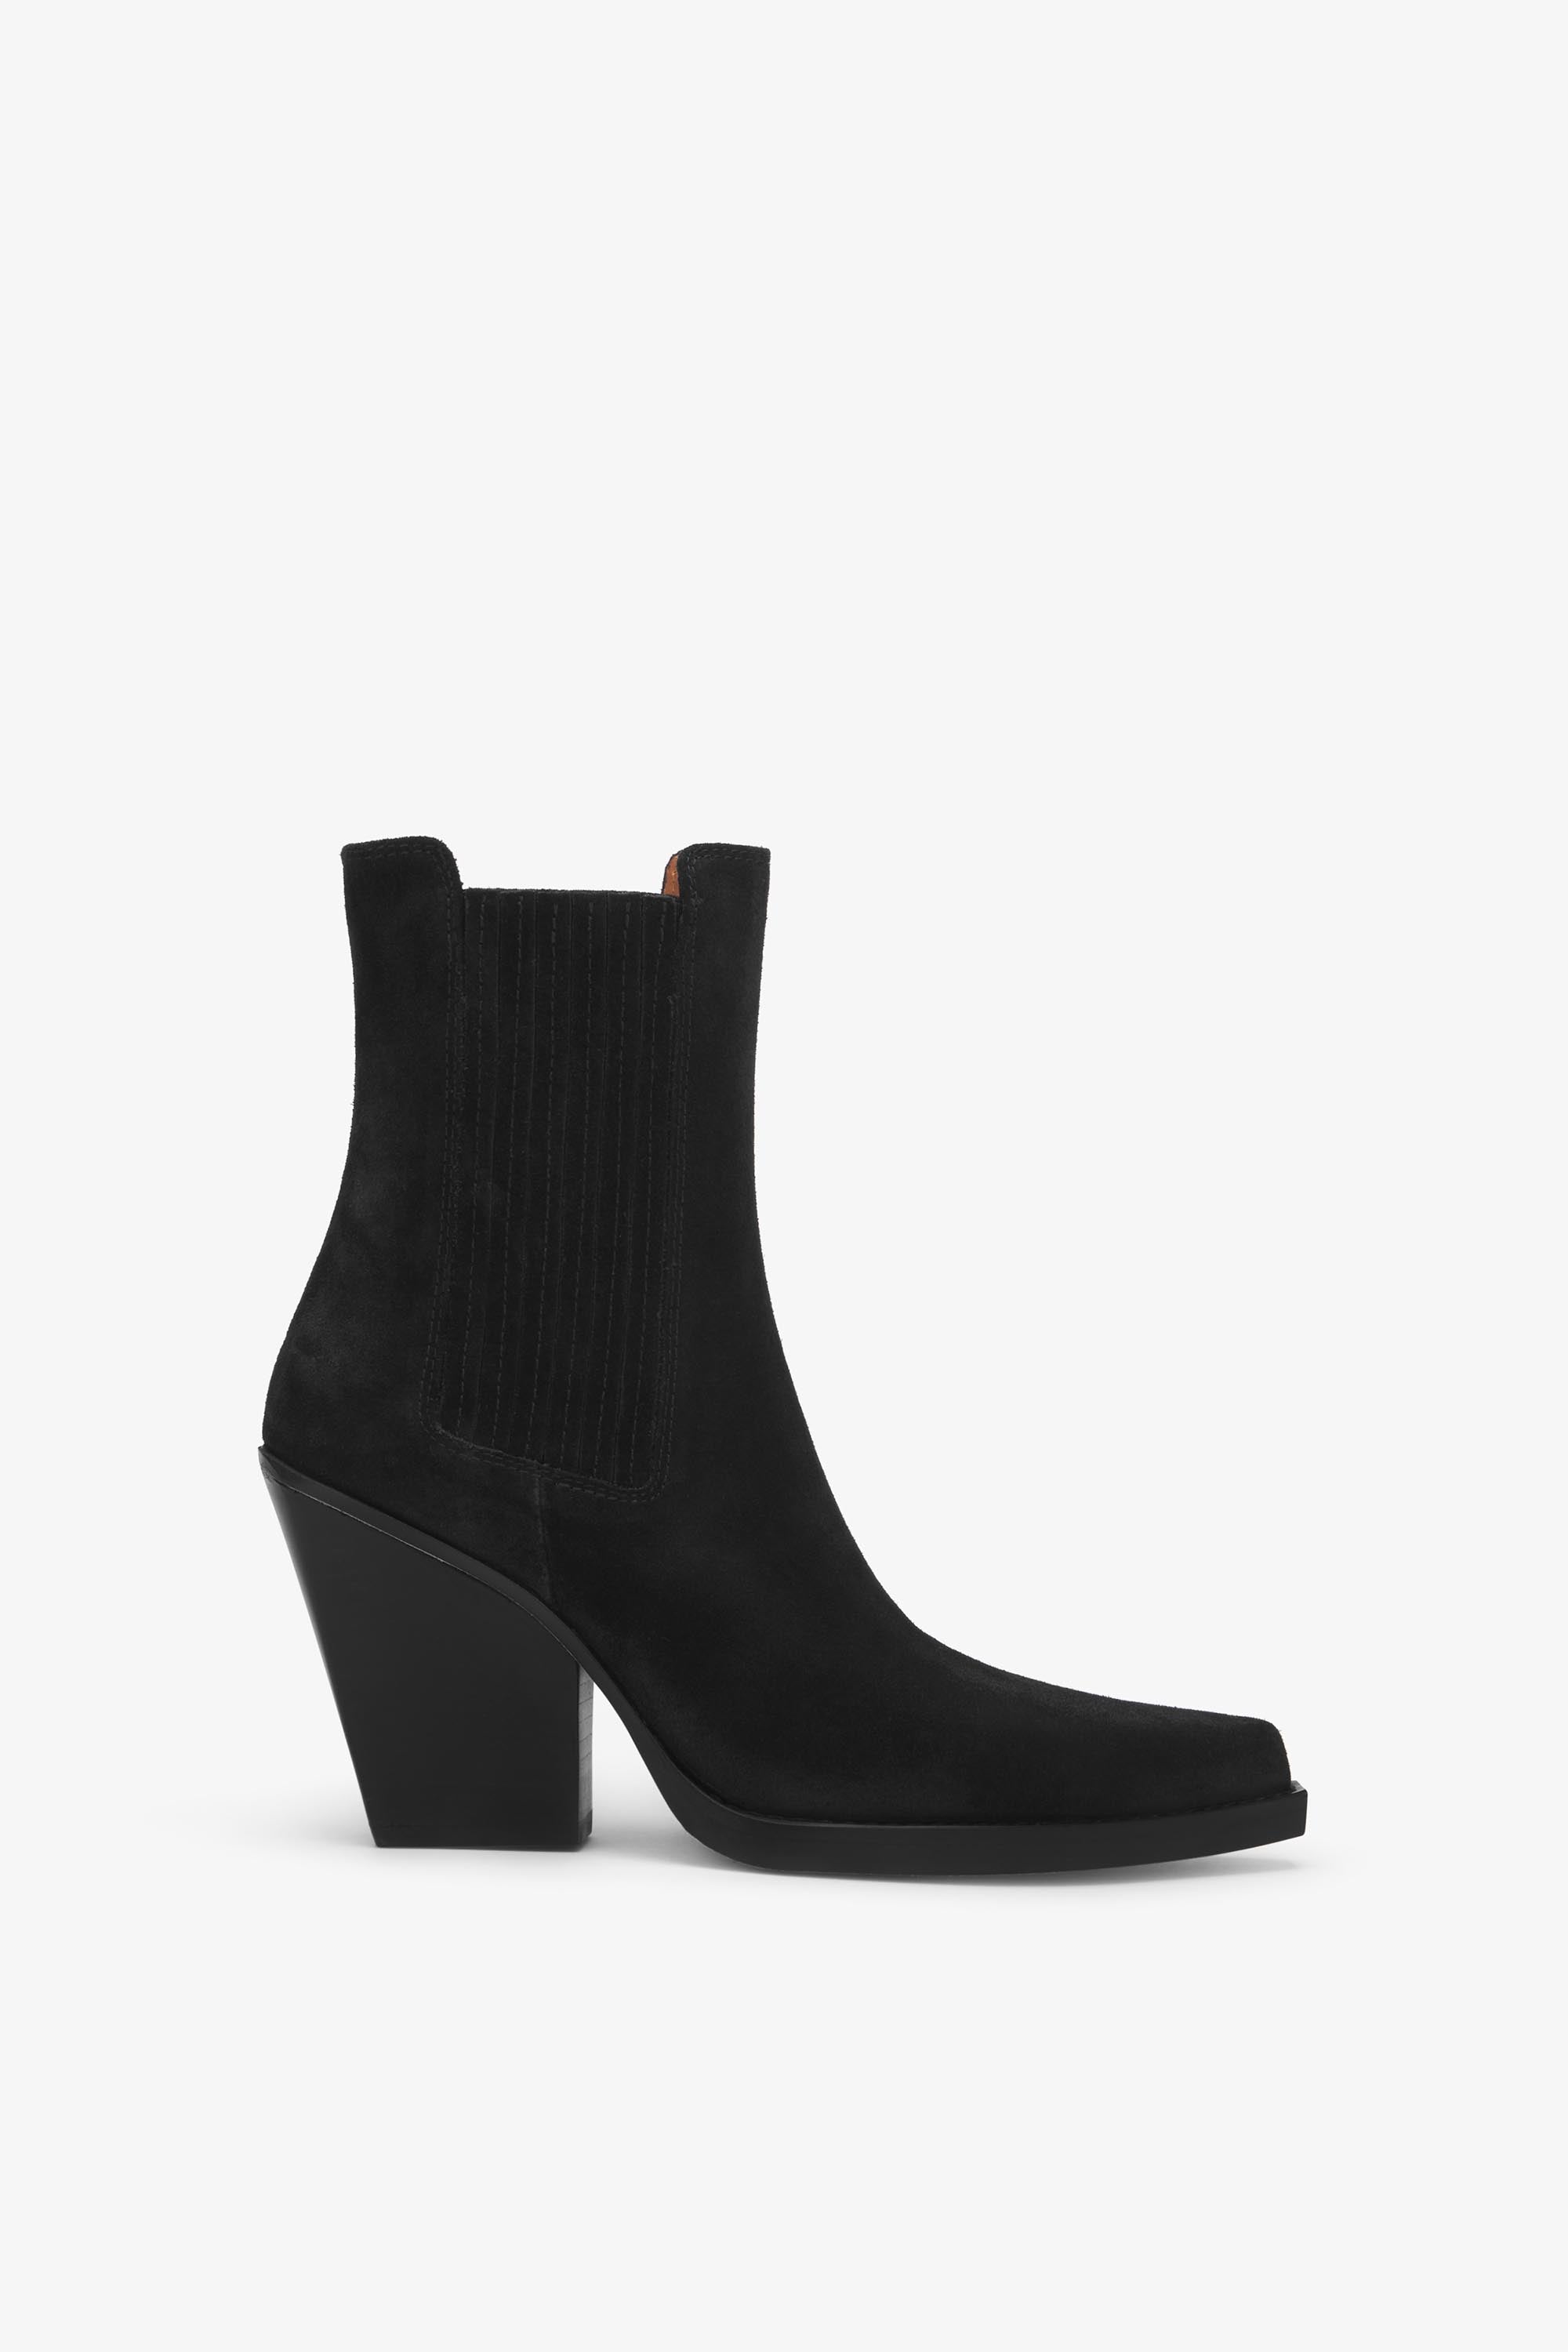 Women's ankle boots: black, brown and other colors | Paris Texas